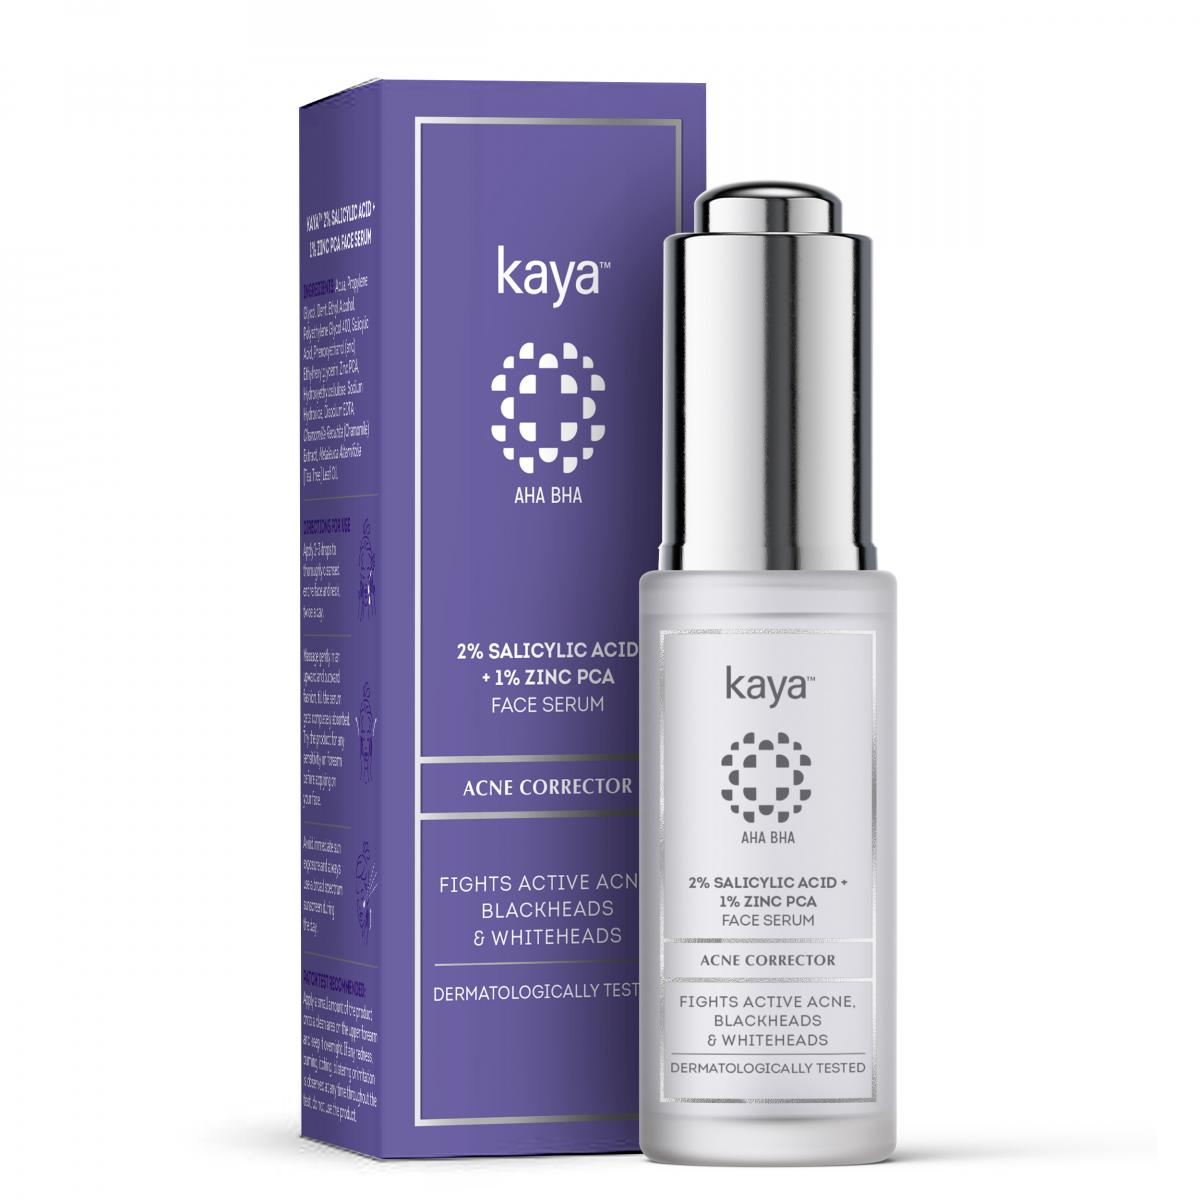 THIS HOLIDAY SEASON GET SOME SUPERFOOD FOR YOUR SKIN FROM KAYA'S NEW SKIN CREW